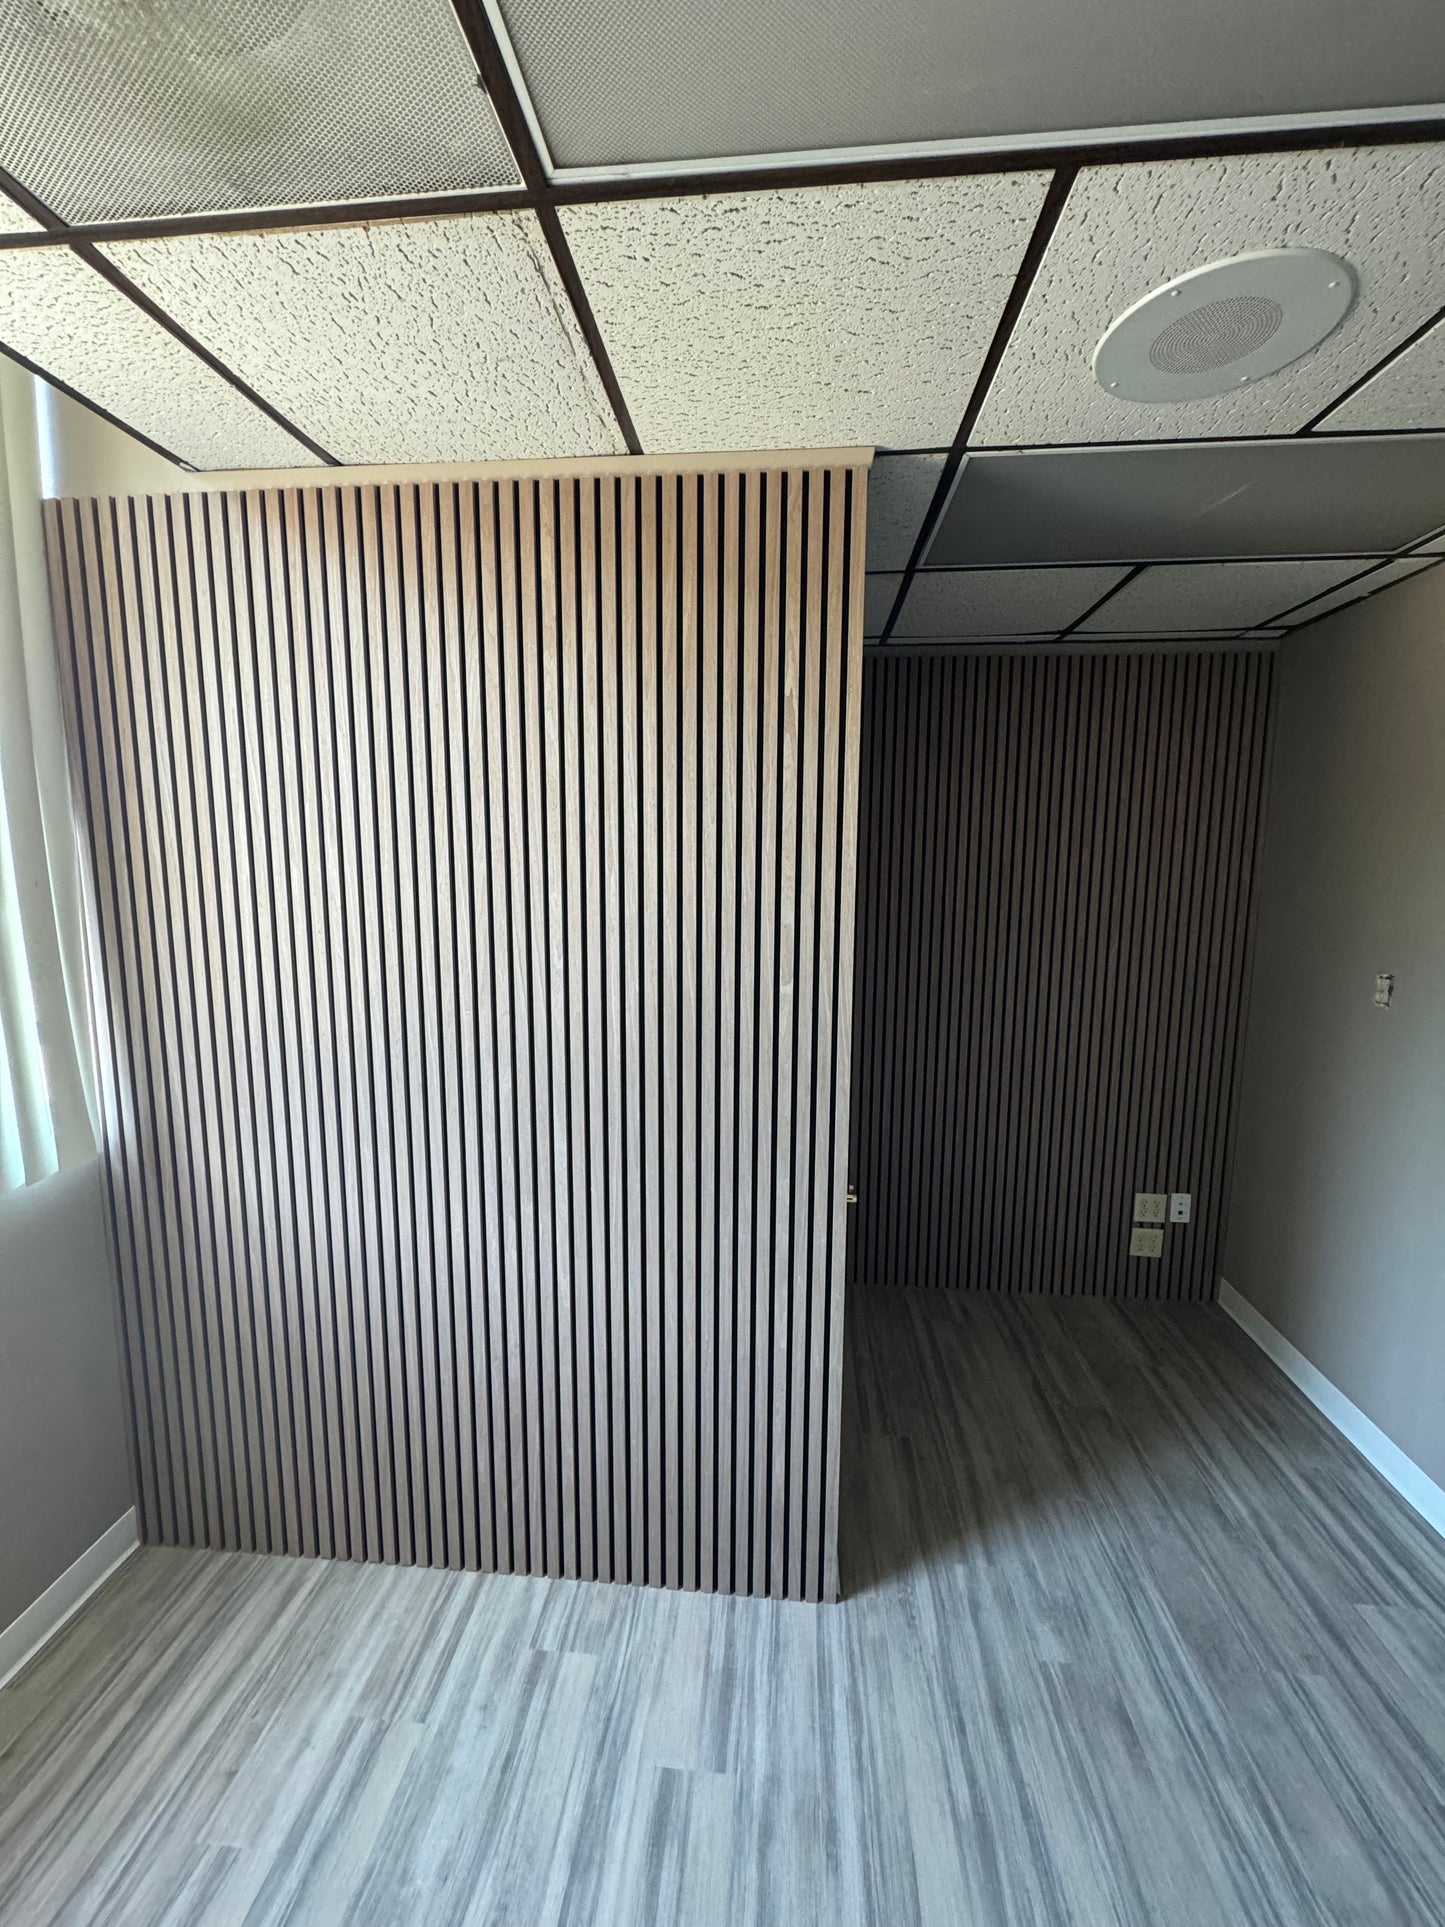 Wood Acoustic Wall Panels Walnut Color Two Tone Accent Slat Wall Decor 2 ft wide by 8 ft long